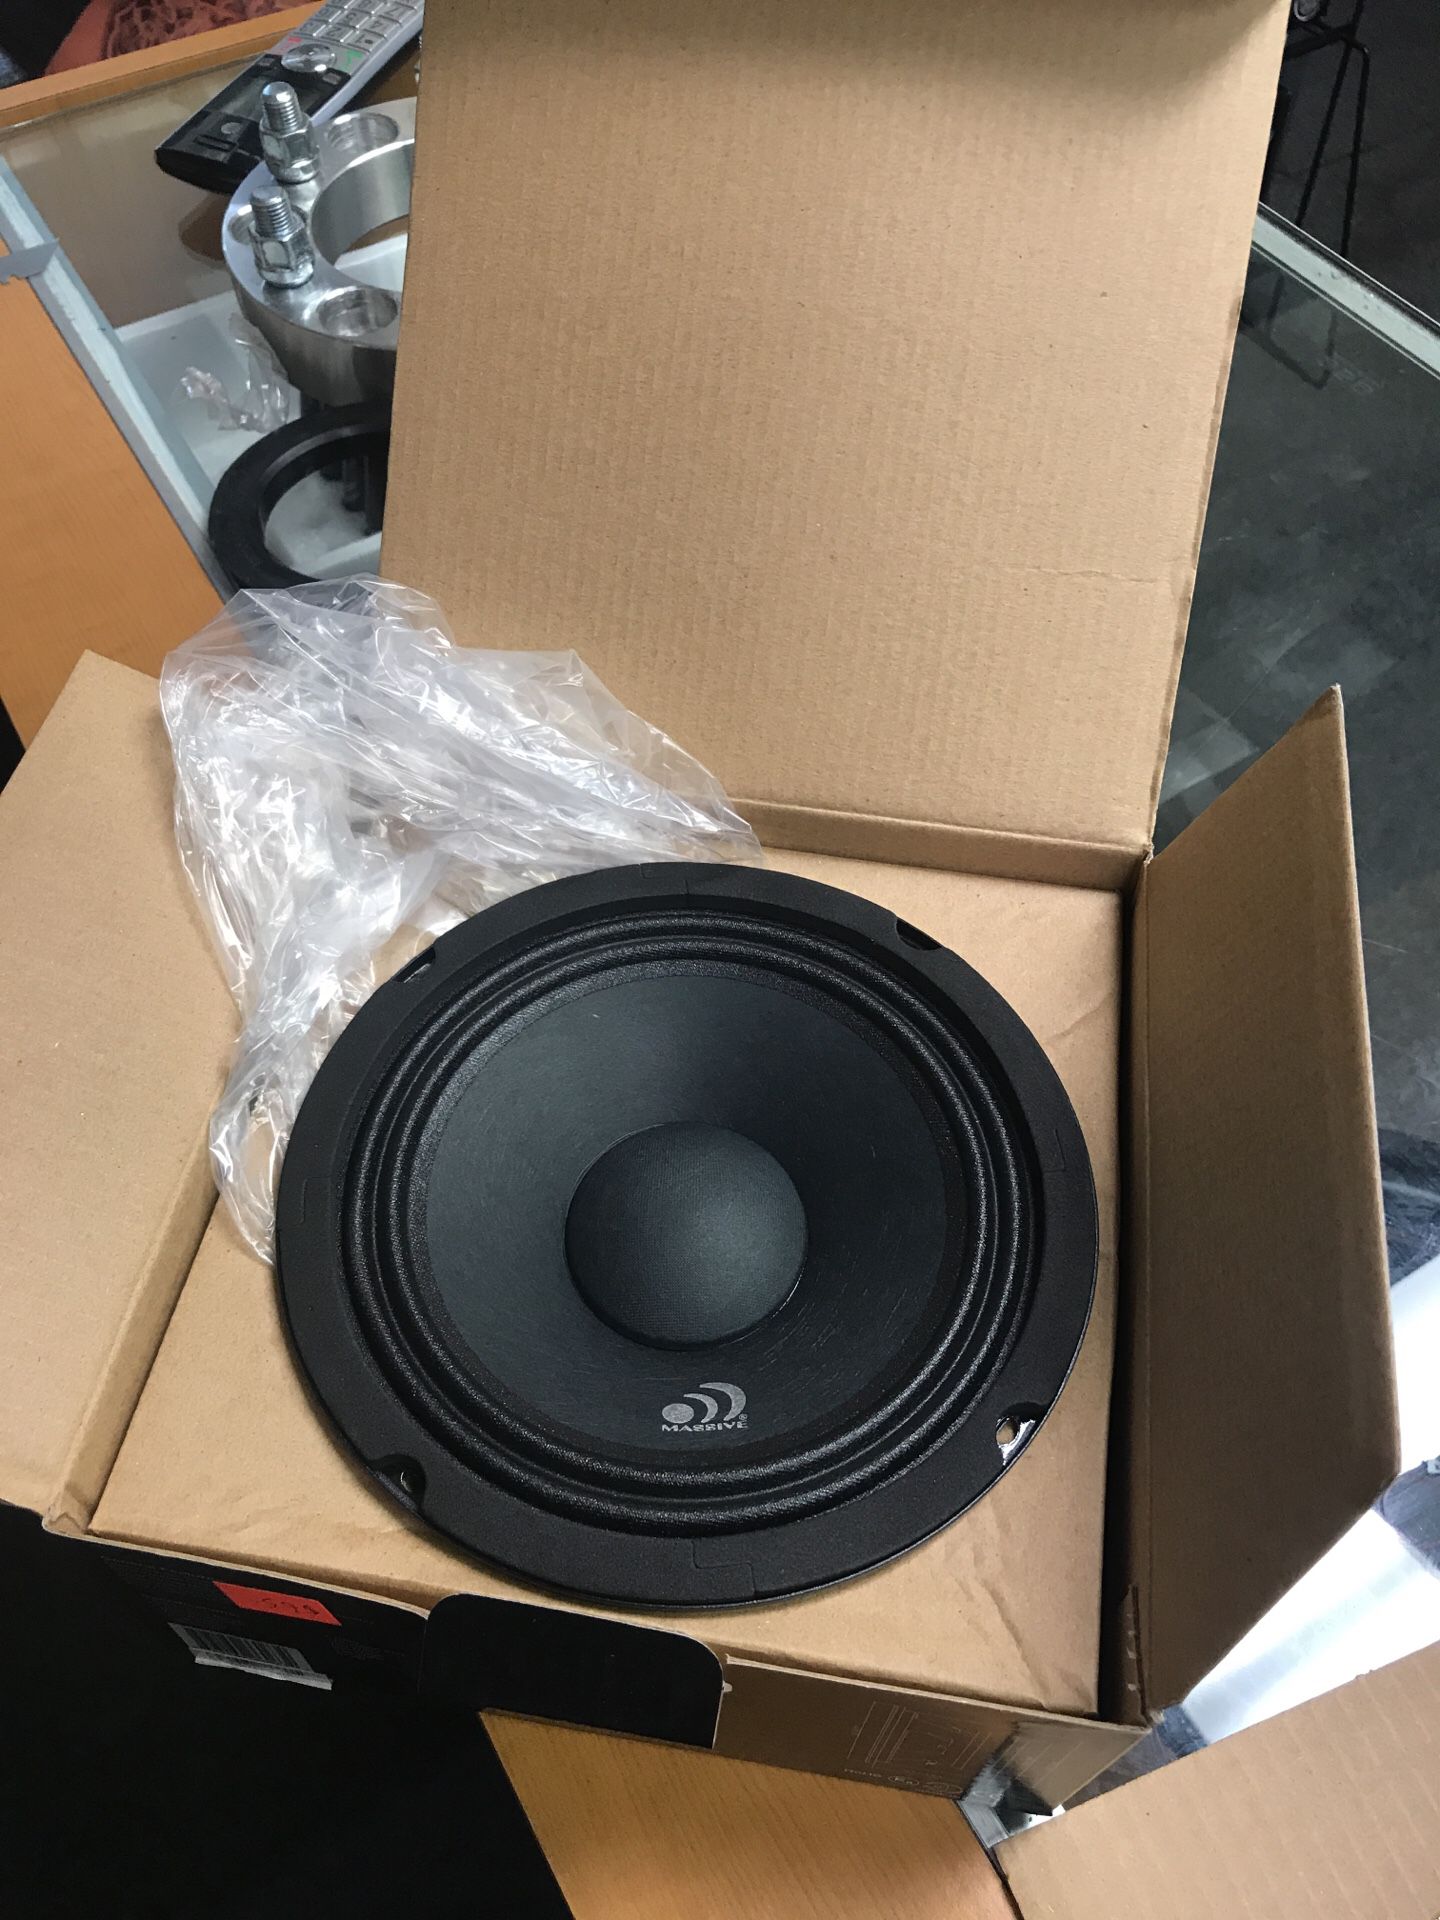 Massive 6 inch speakers - large selection